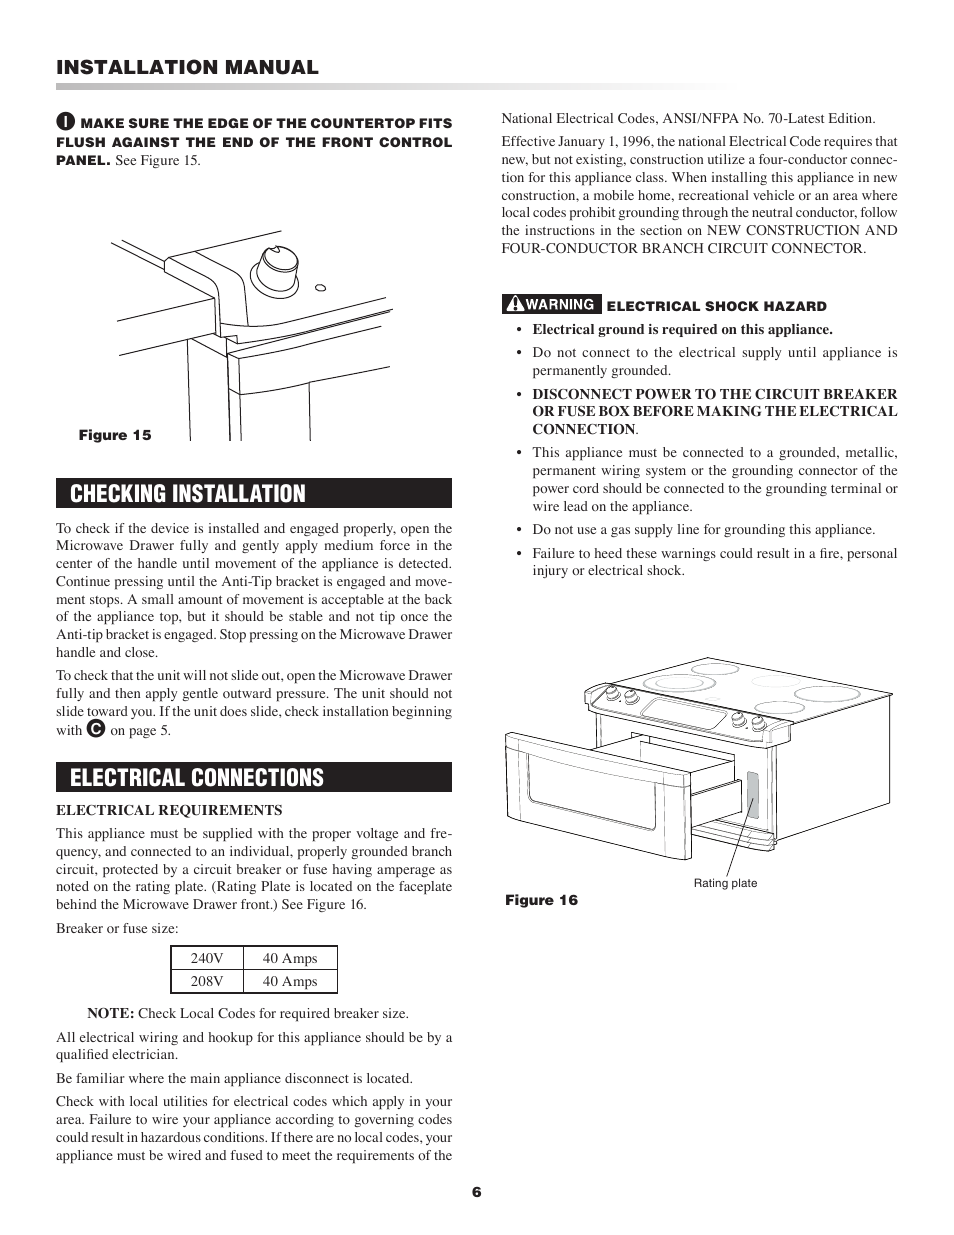 Checking installation, Electrical connections, Installation manual | Sharp Cooktop User Manual | Page 6 / 8